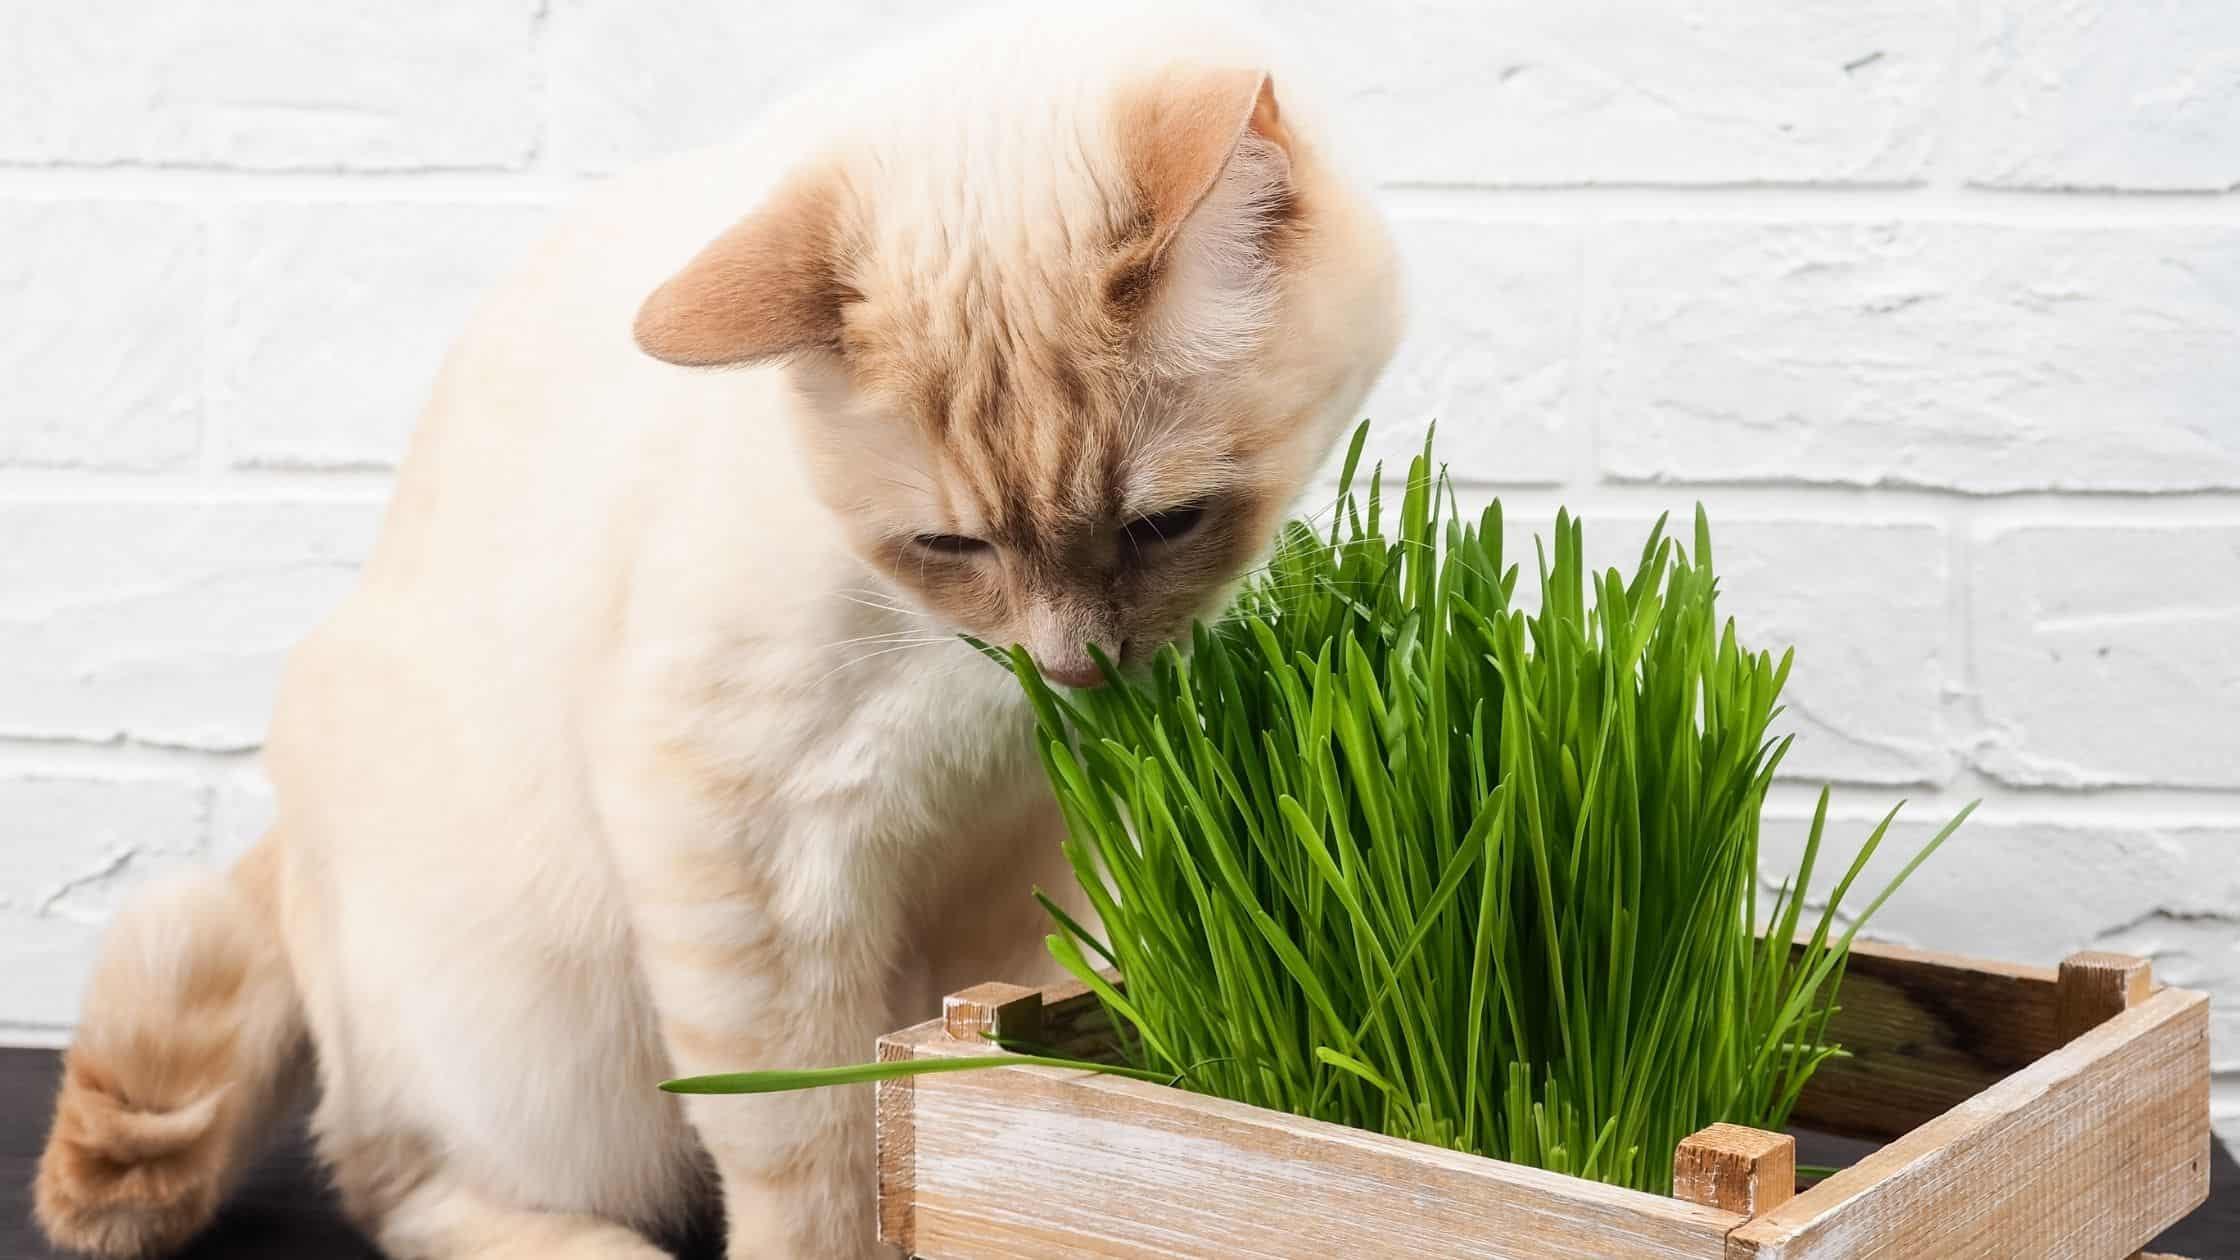 10 Pet-Friendly Houseplants That Still Have The Wow Factor - Affordable Pet Insurance Plans | Get Odie